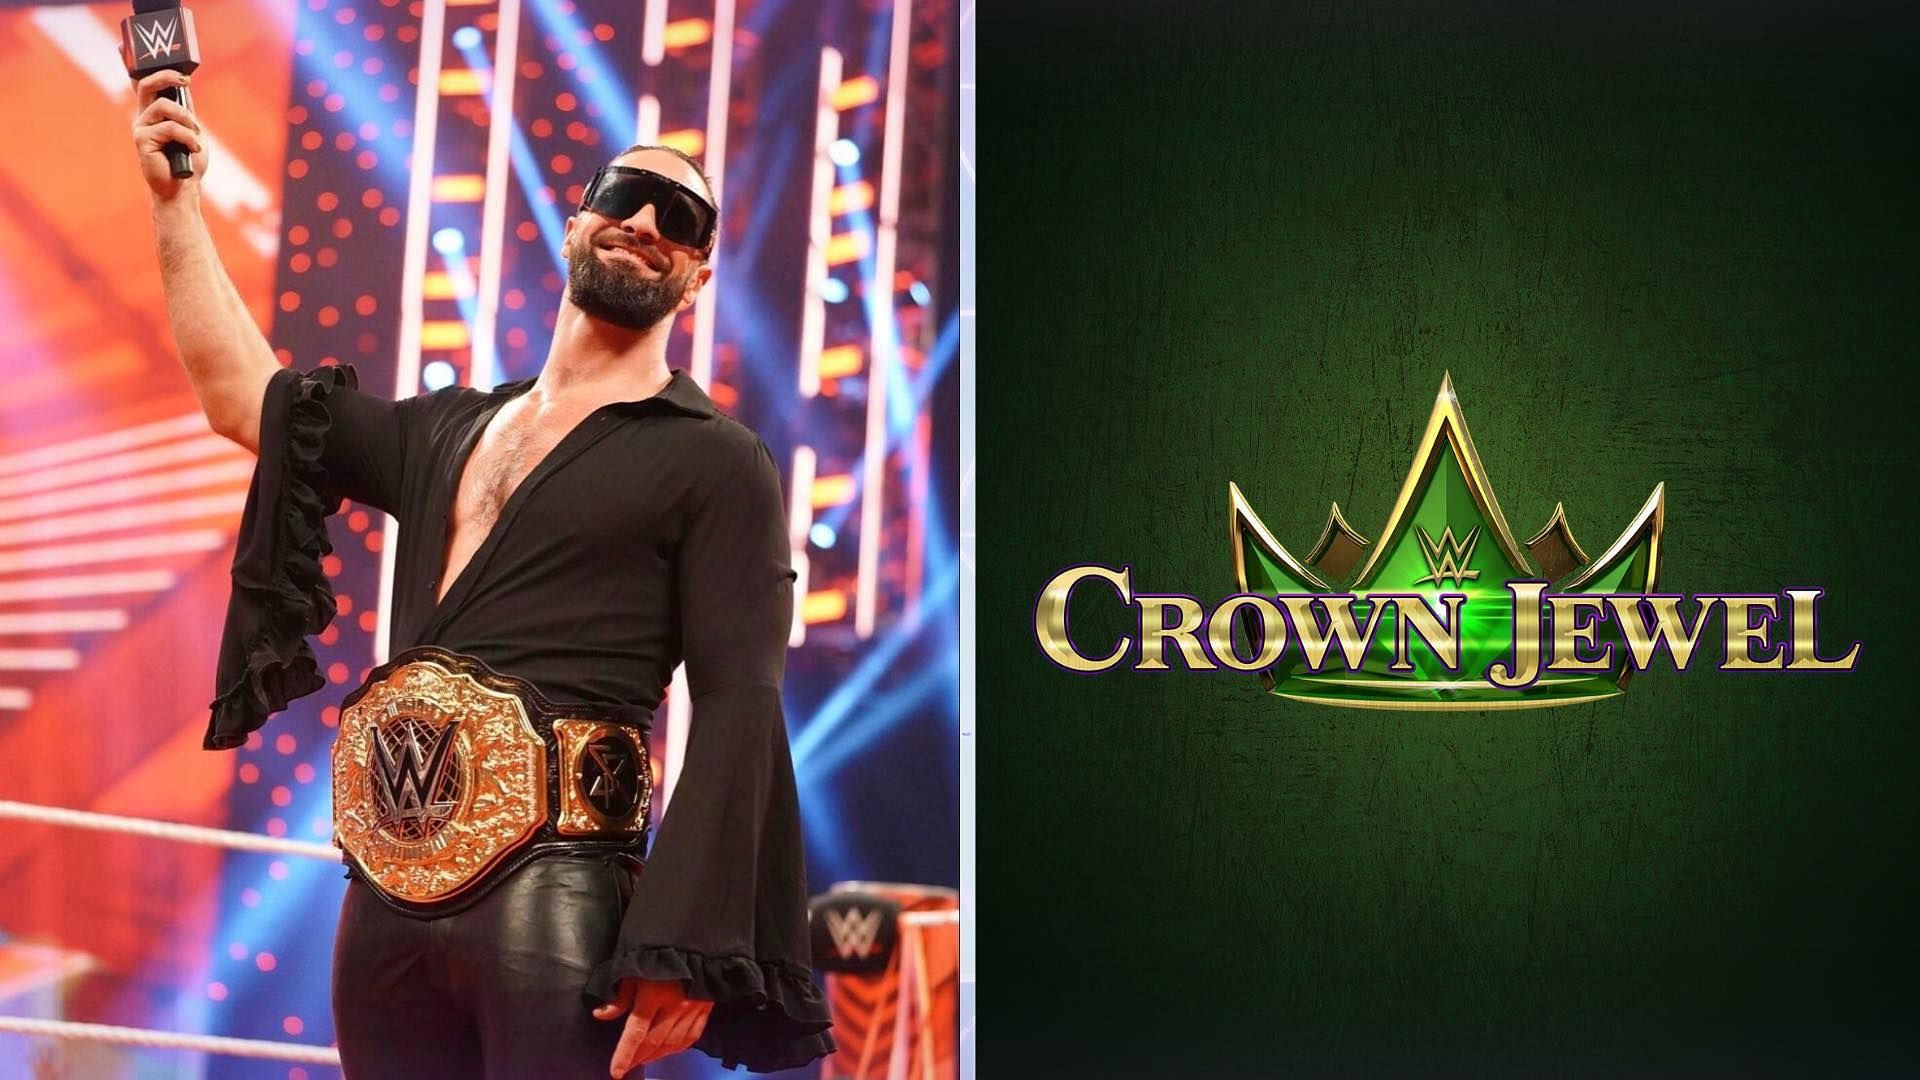 Will The Visionary lose his cherished title at Crown Jewel?